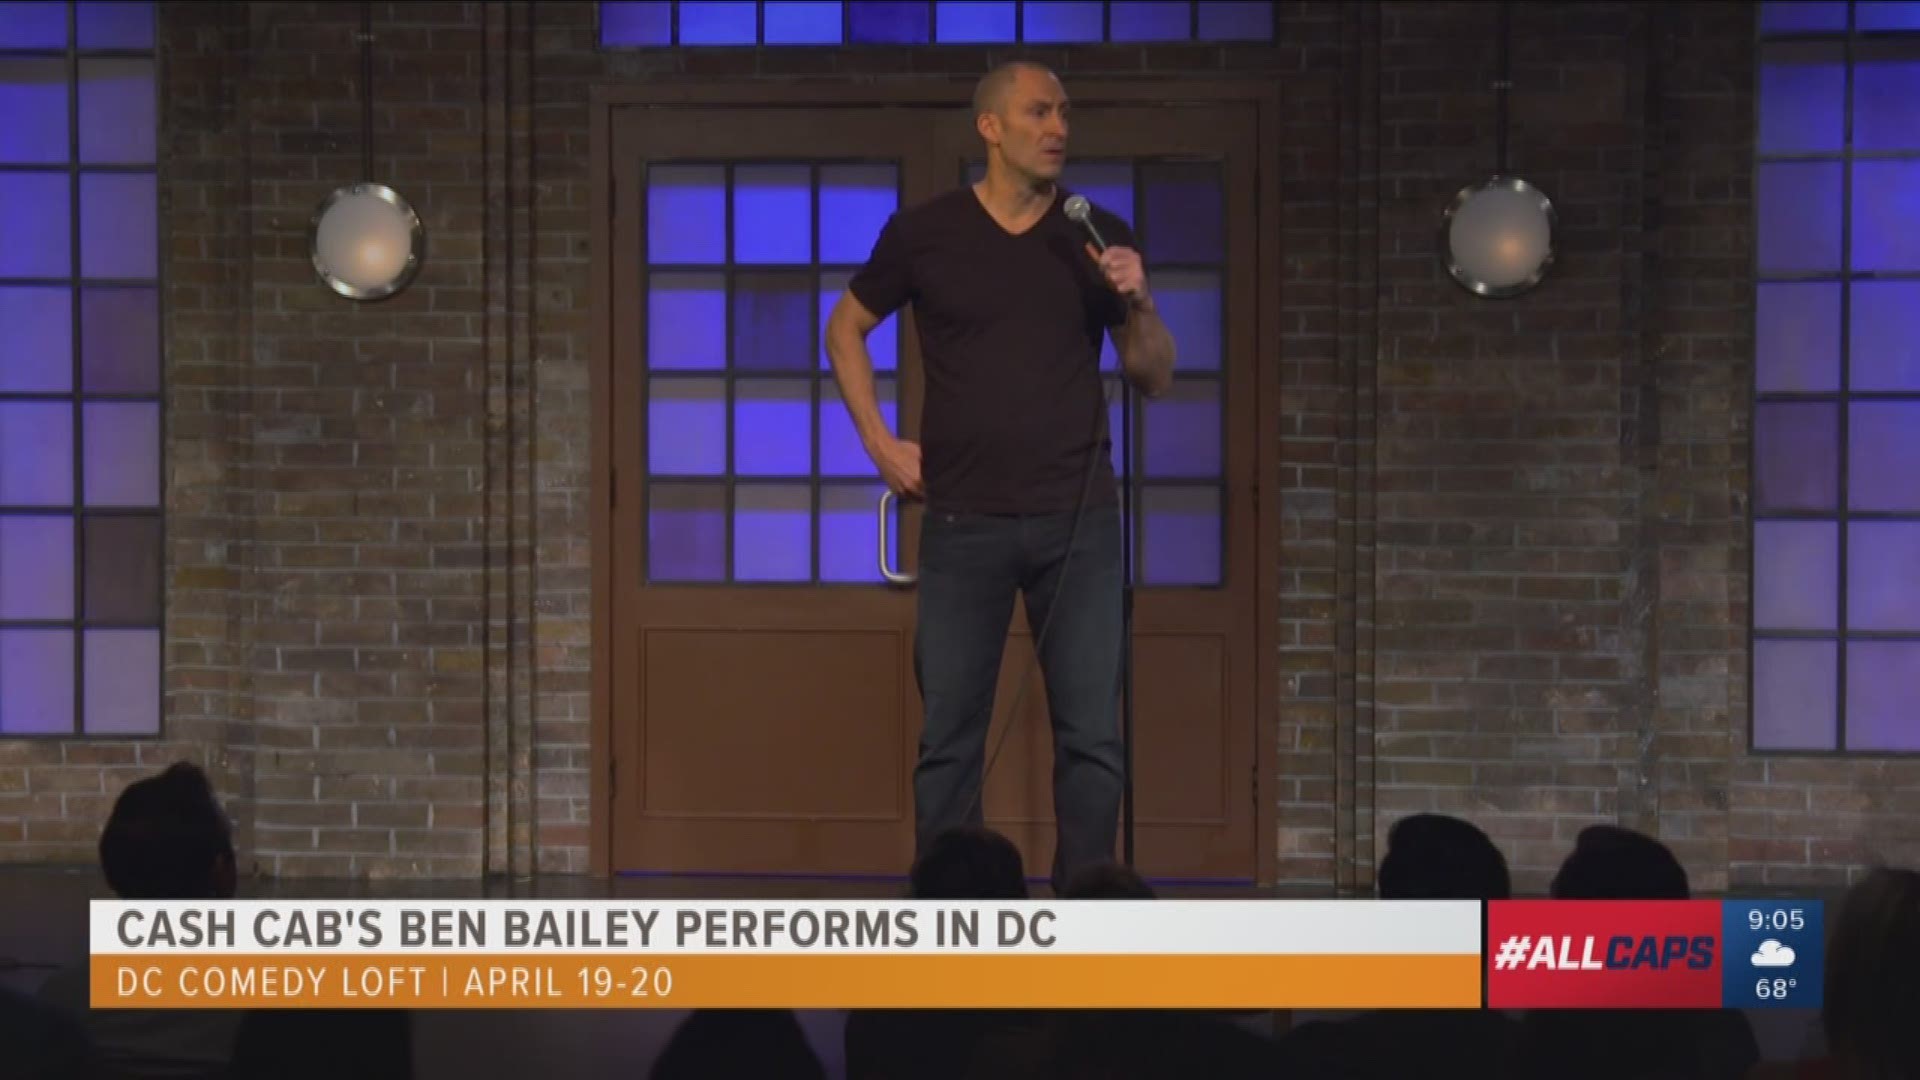 Come out and see stand up comedian and host of "Cash Cab" Ben Bailey as he takes a tour in DC. He will be performing stand up at The DC Comedy Loft on April 19-20, 2019.